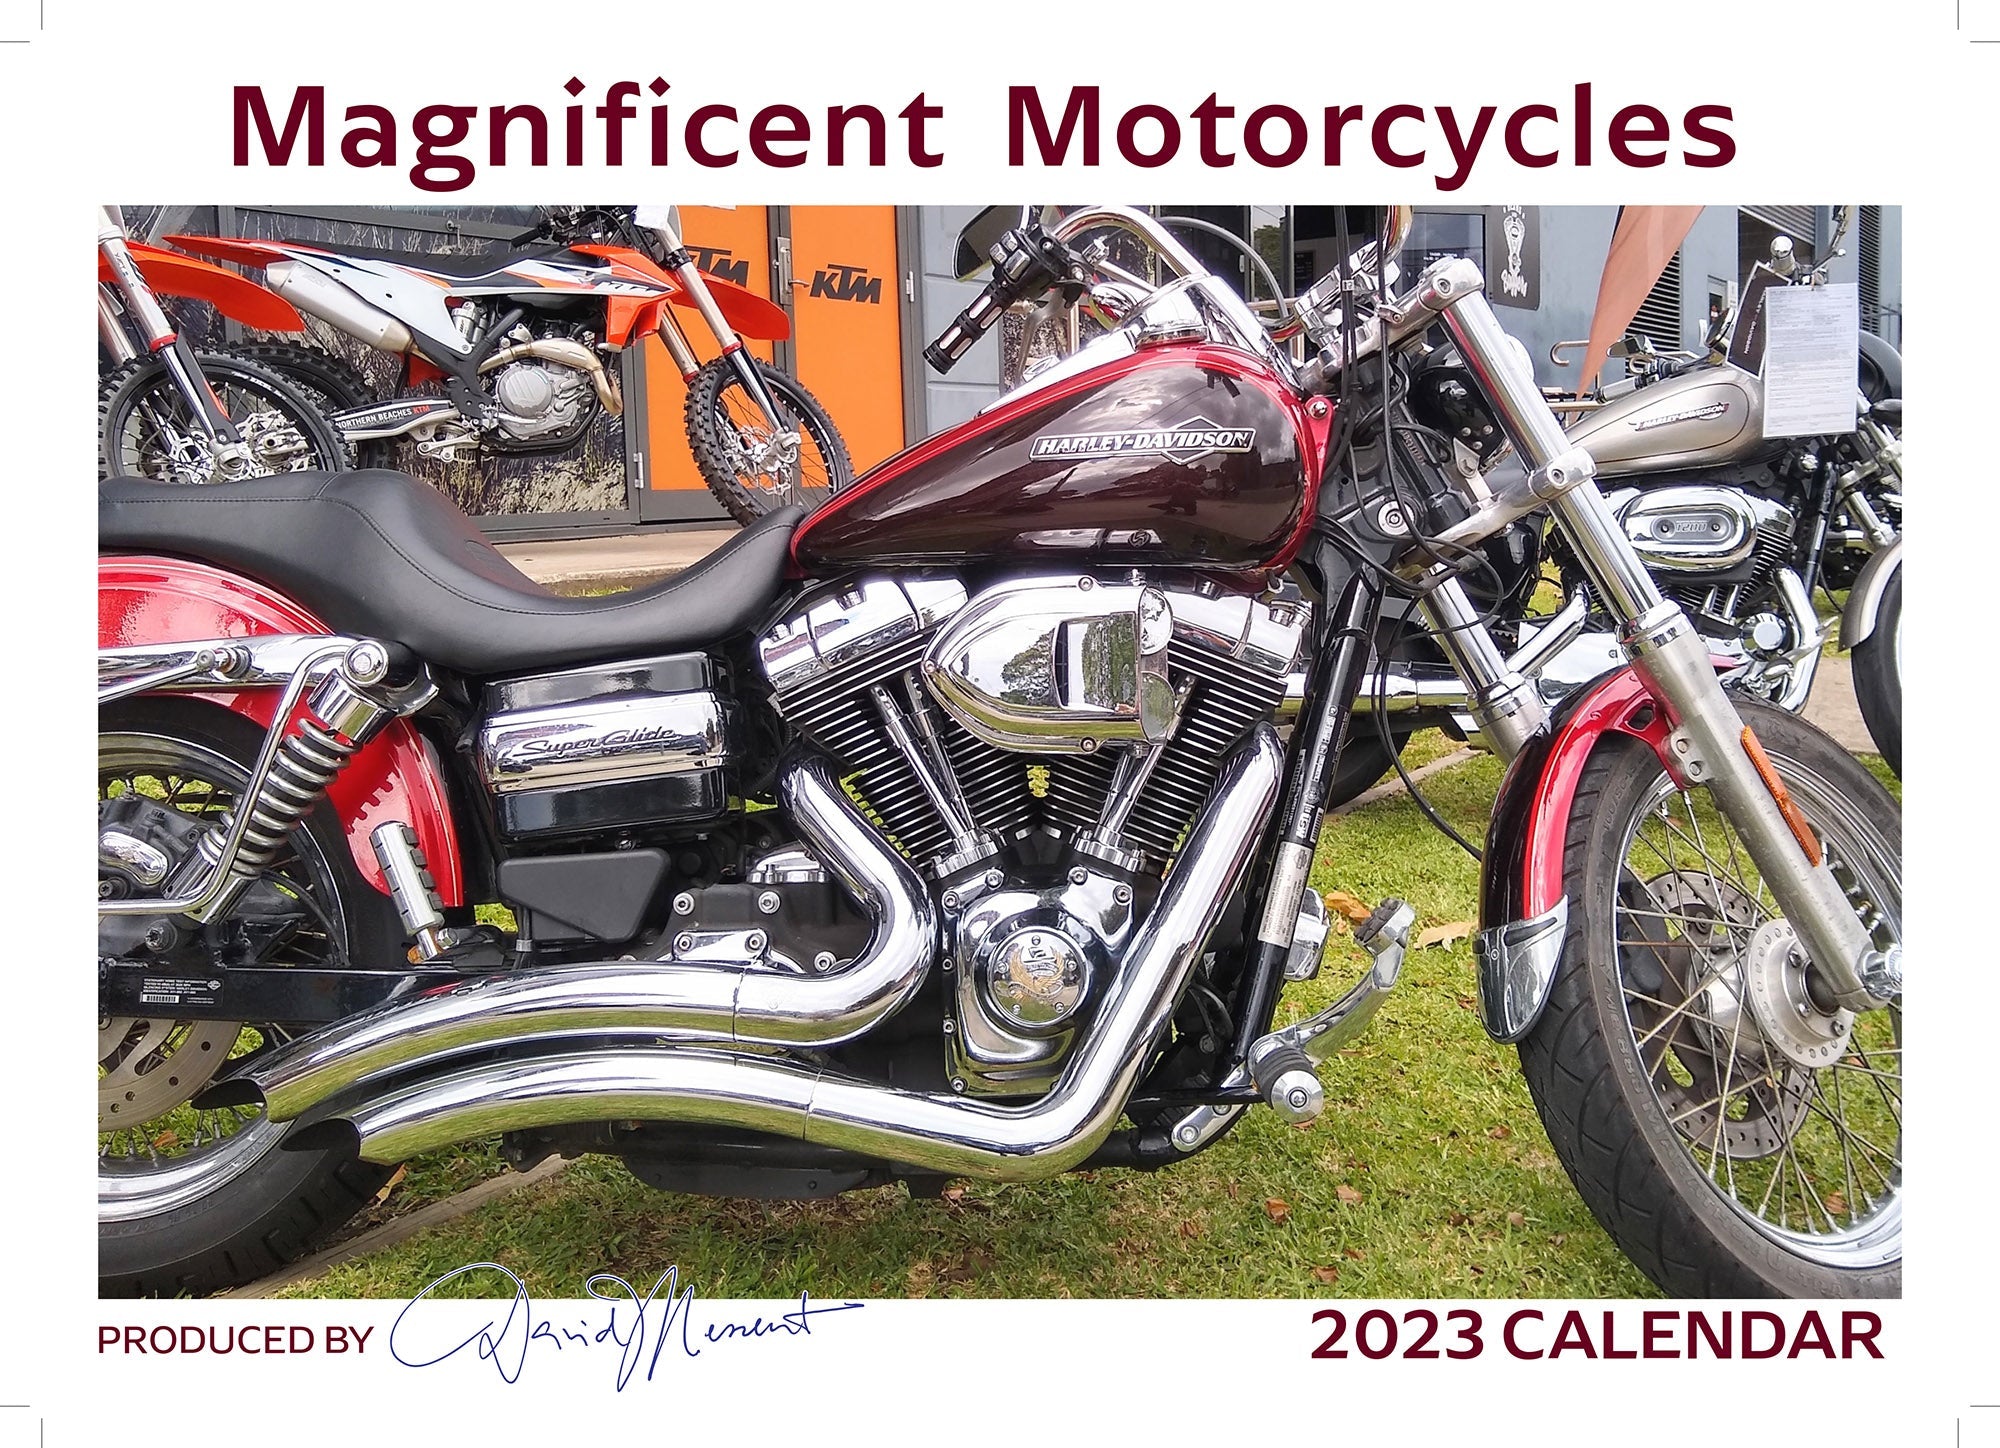 2023 Magnificent Motorcycles by David Messent - Horizontal Wall Calendar